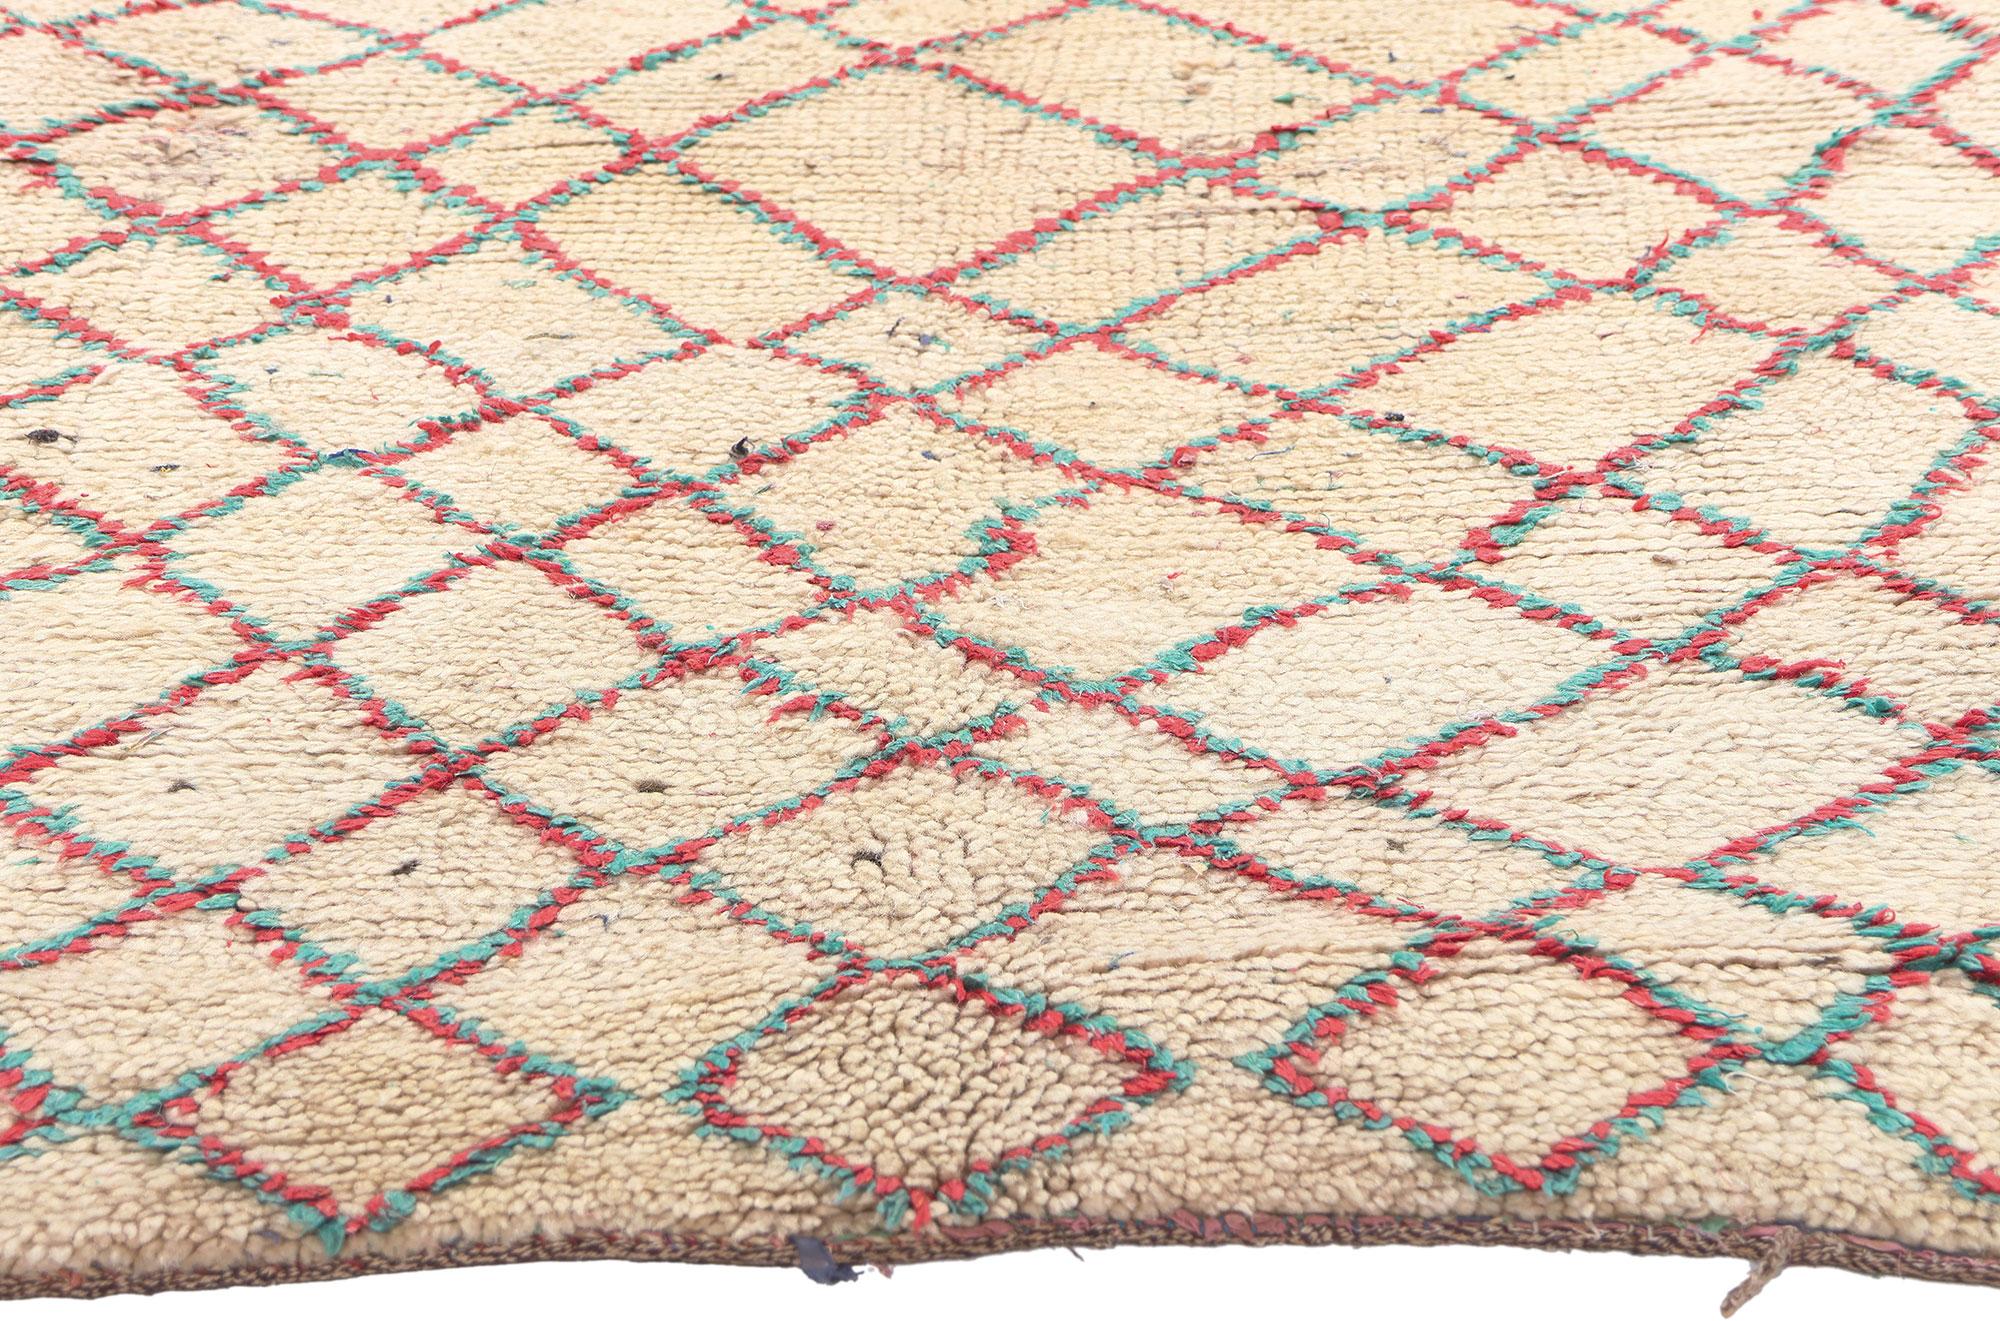 Vintage Boucherouite Moroccan Rag Rug, Tribal Enchantment Meets Rugged Beauty In Good Condition For Sale In Dallas, TX